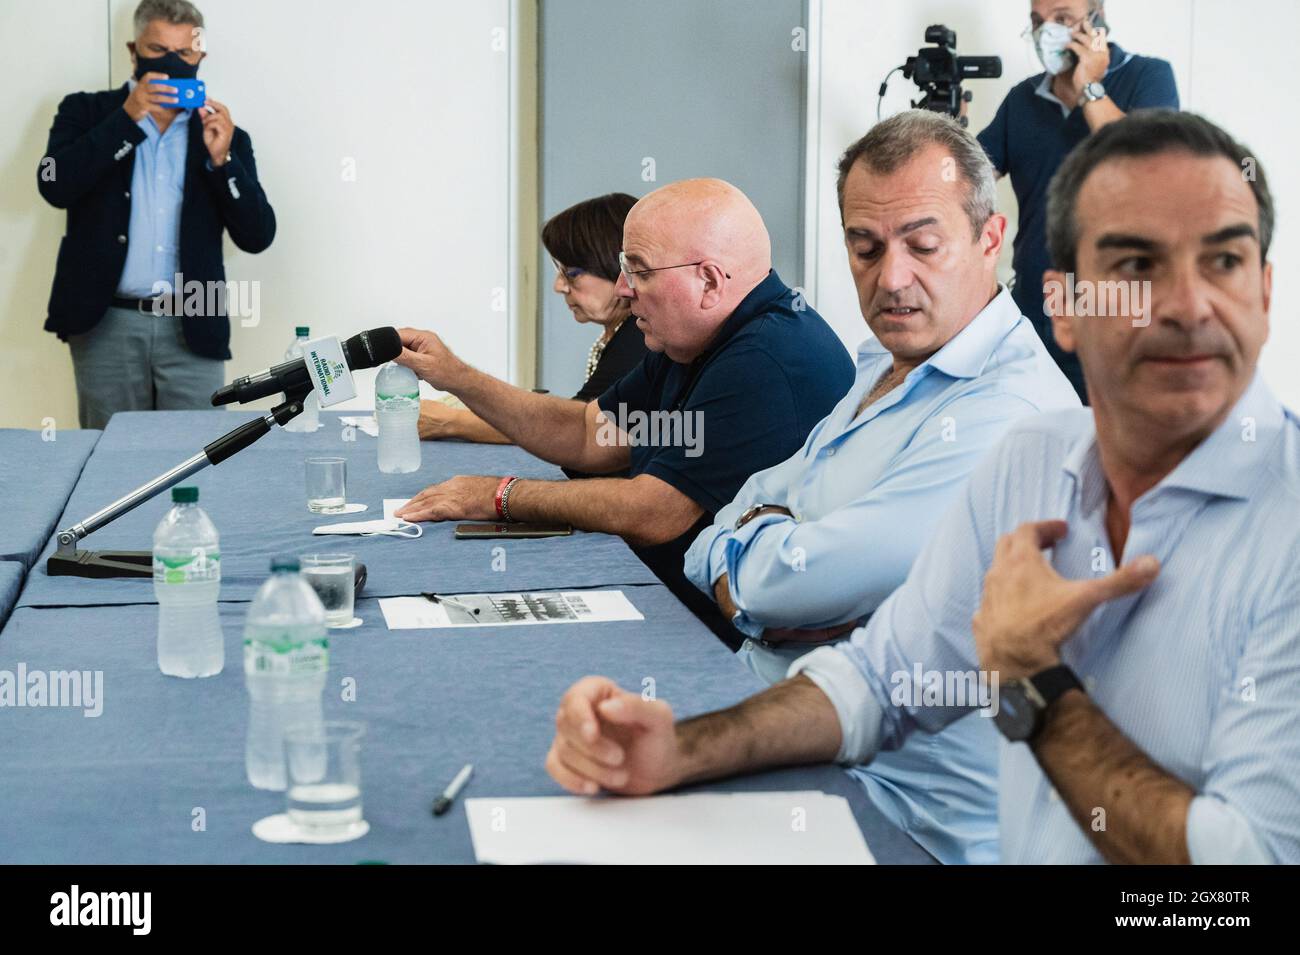 Lamezia Terme, Calabria, Italy. 20th Sep, 2021. Roberto Occhiuto (R), Luigi De Magistris (2nd R), Mario Oliverio (C) seen during the debate.Candidates for the position of regional governor, Amalia Bruni (PD; Democratic Party), Roberto Occhiuto (FI, Forza Italia), Mario Oliverio (independent candidate), Luigi De Magistris (independent candidate) met the general secretaries of Italian major unions, Angelo Sposato (Cgil), Tonino Russo (Cisl) and Santo Biondo (Uil), for discussing their approaches and solutions to the regionÃ-s main issues. (Credit Image: © Valeria Ferraro/SOPA Images via ZUM Stock Photo